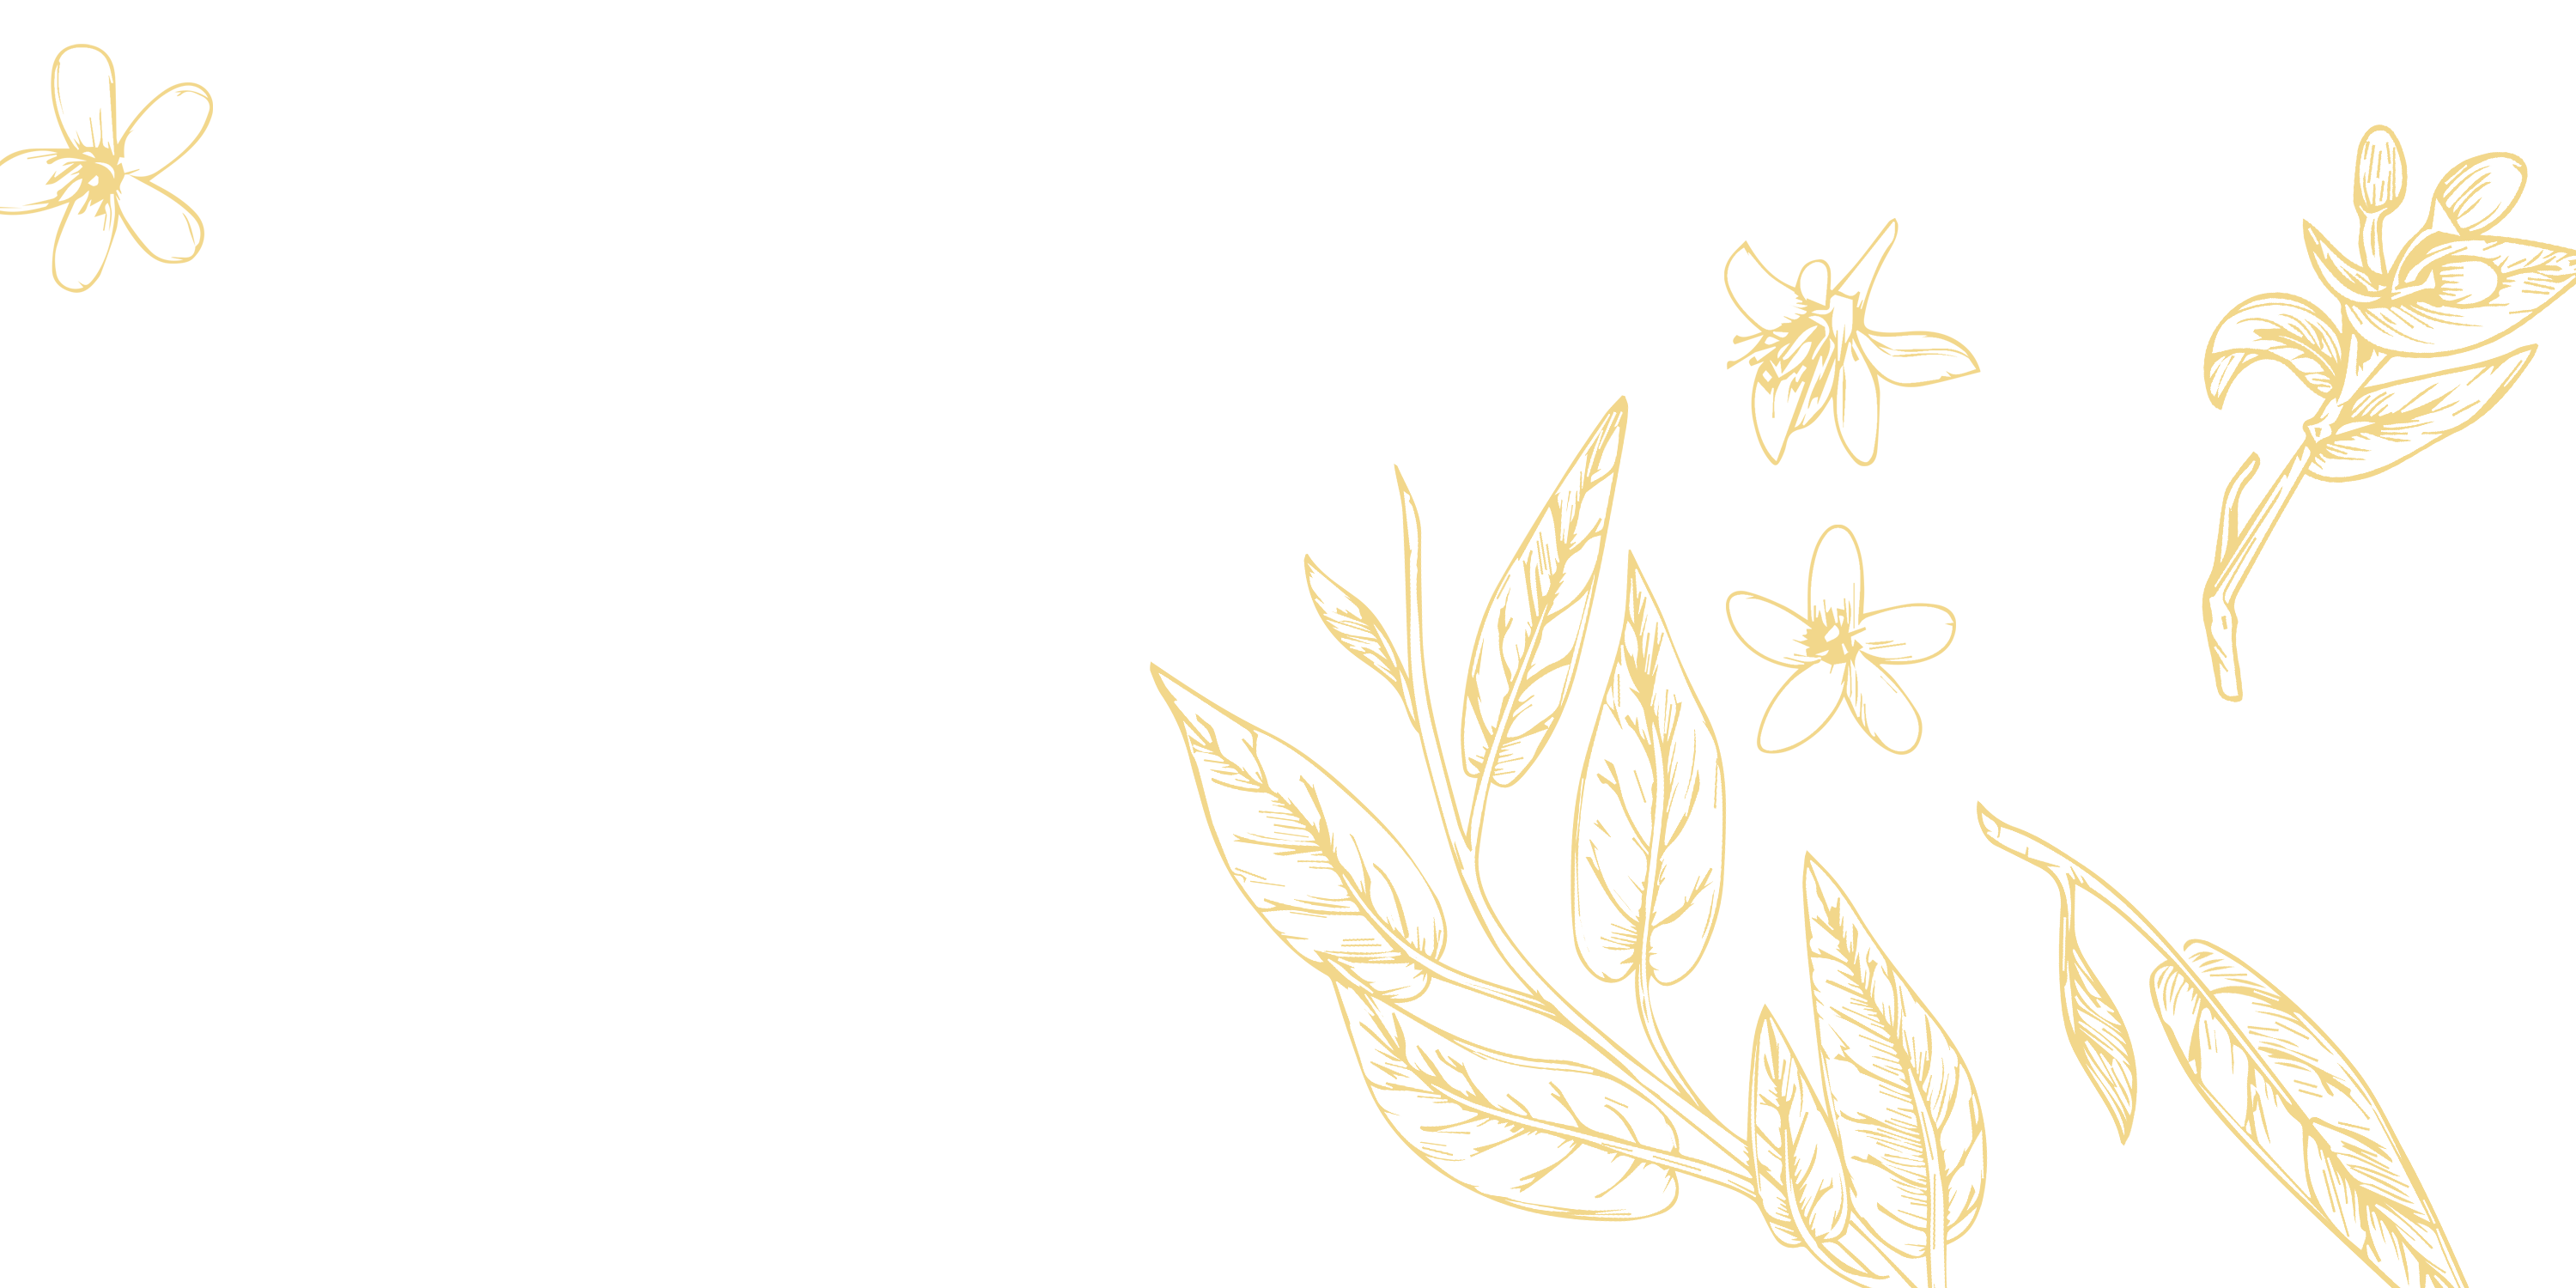 A black background with yellow leaves and flowers.